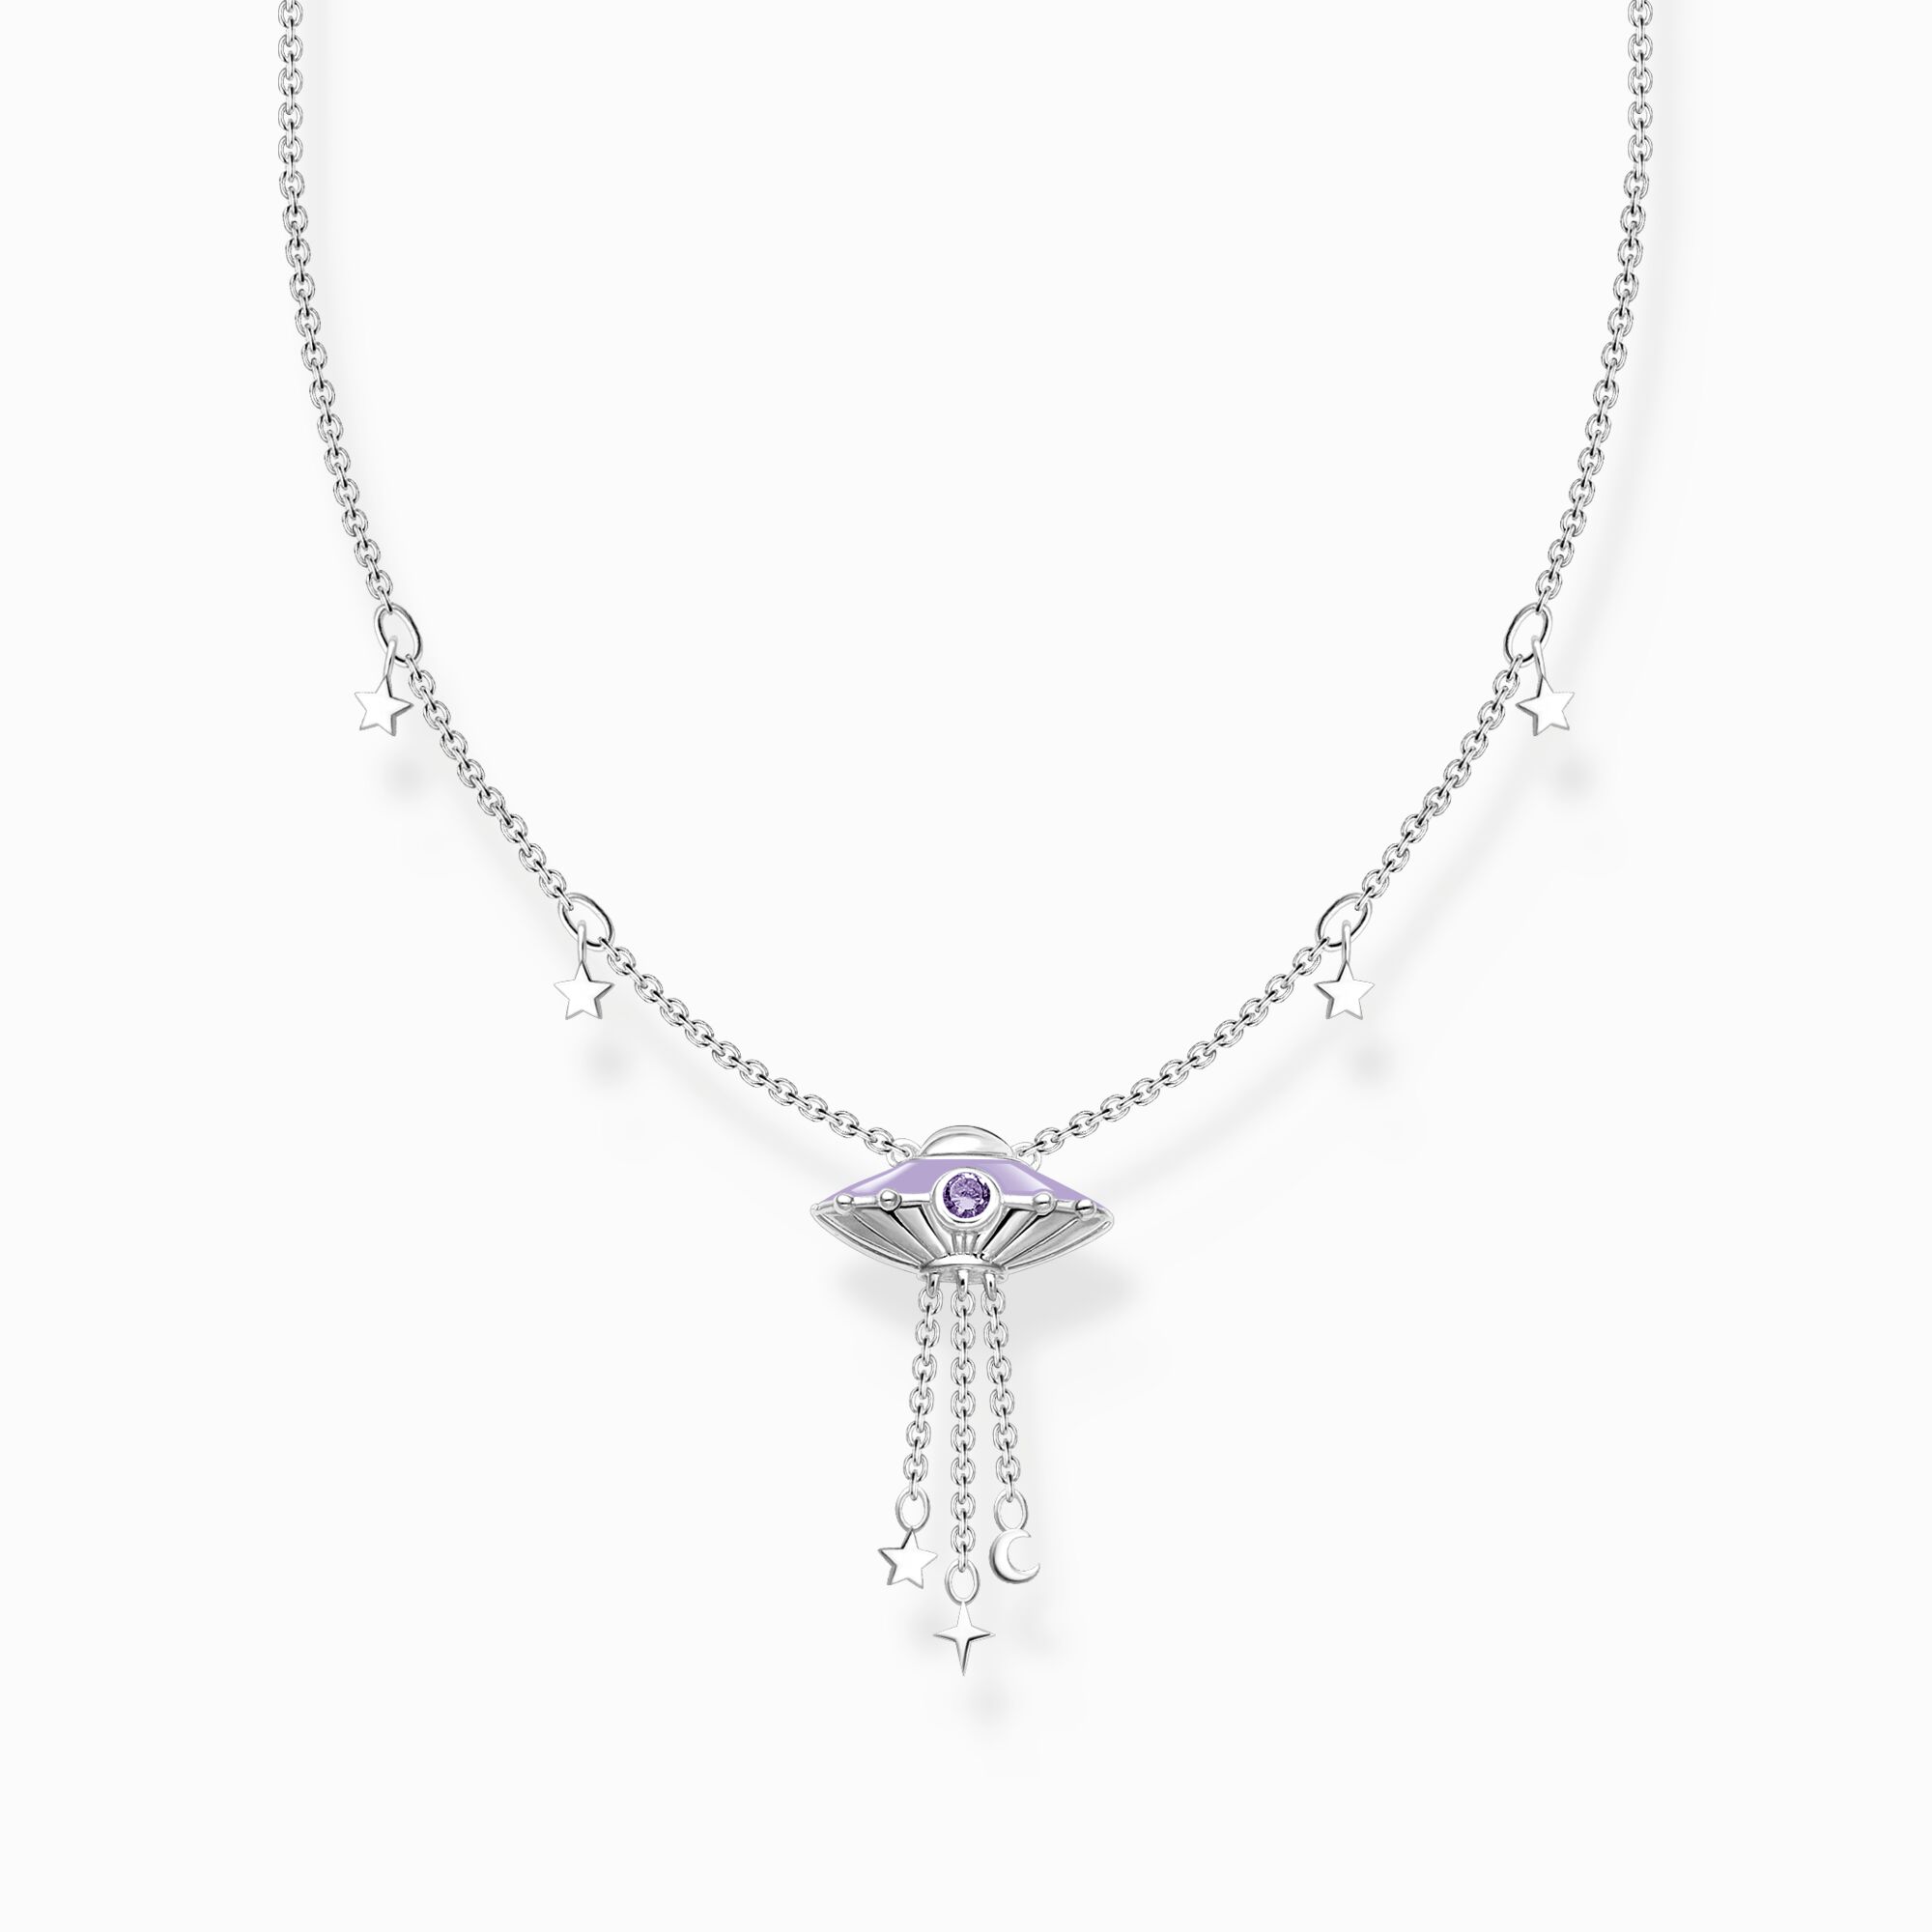 Silver necklace with star ornaments – THOMAS SABO